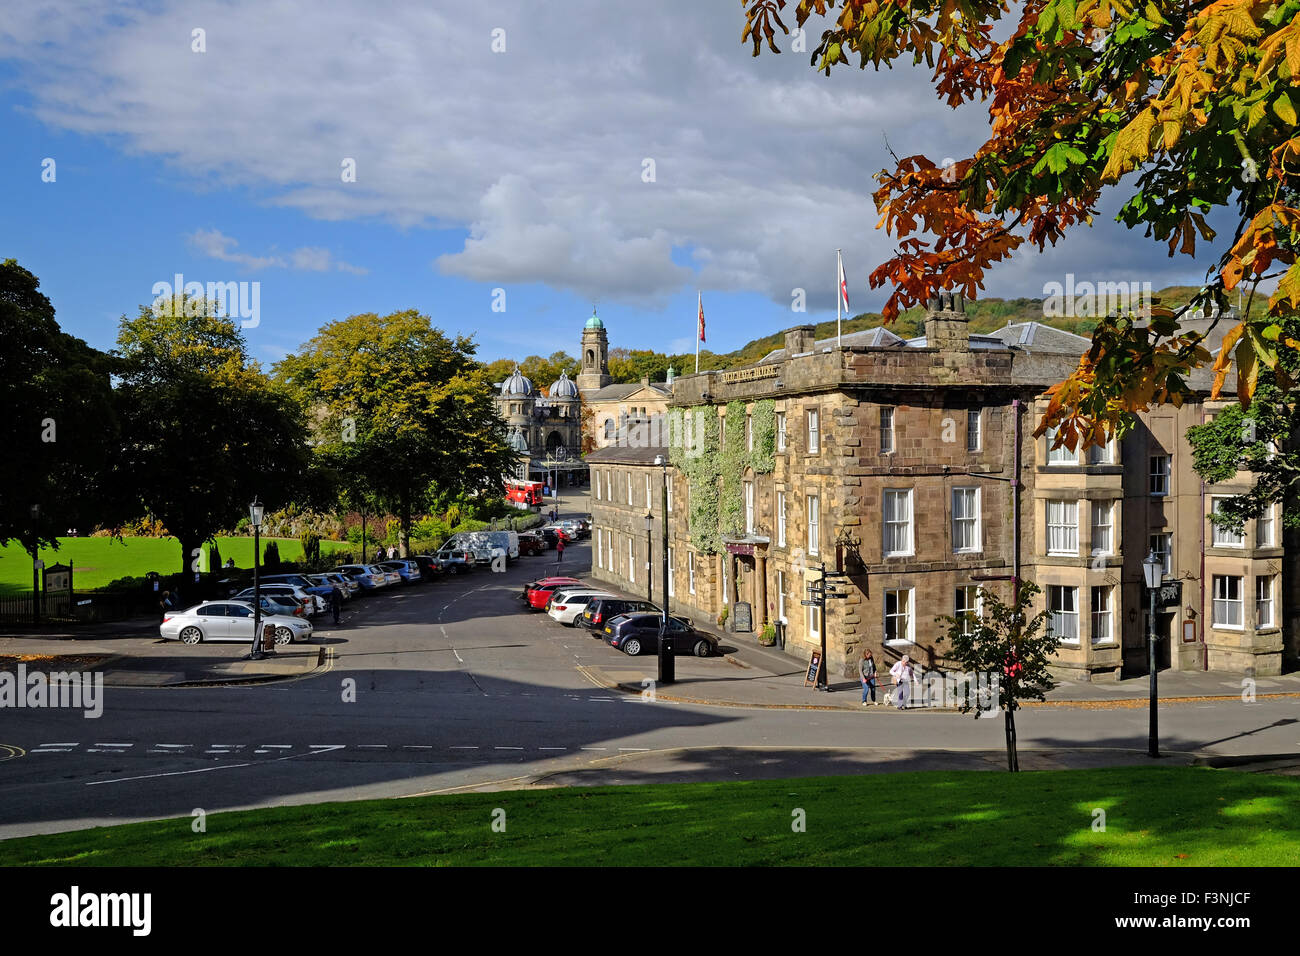 The Old Hall Hotel near The Pavilion Gardens in The spa town of Buxton, Derbyshire . Stock Photo